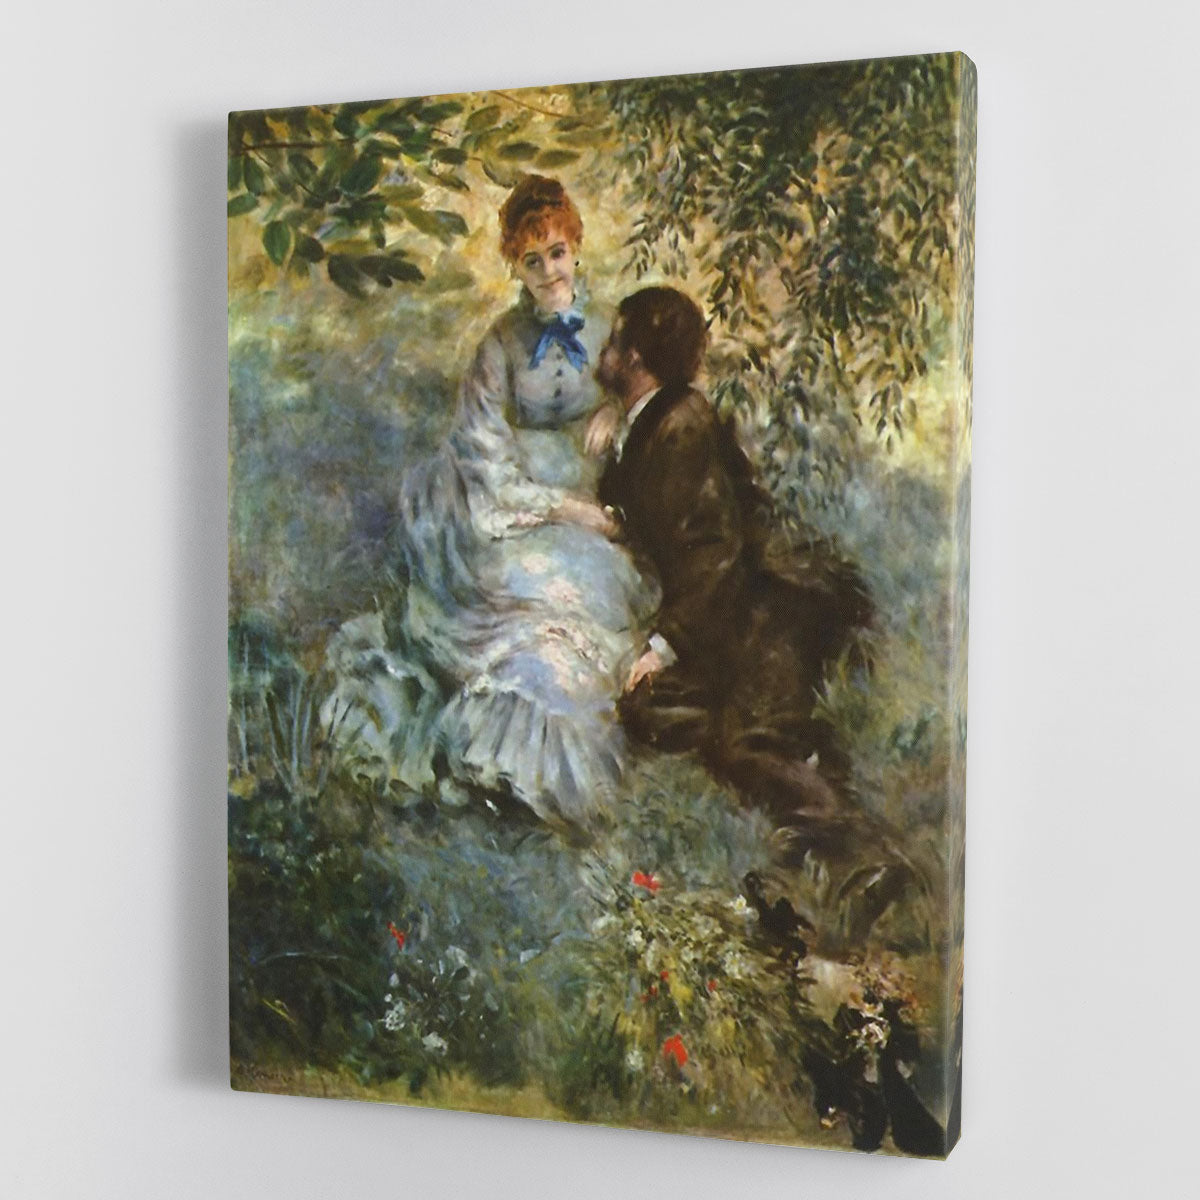 Pair of Lovers by Renoir Canvas Print or Poster - Canvas Art Rocks - 1